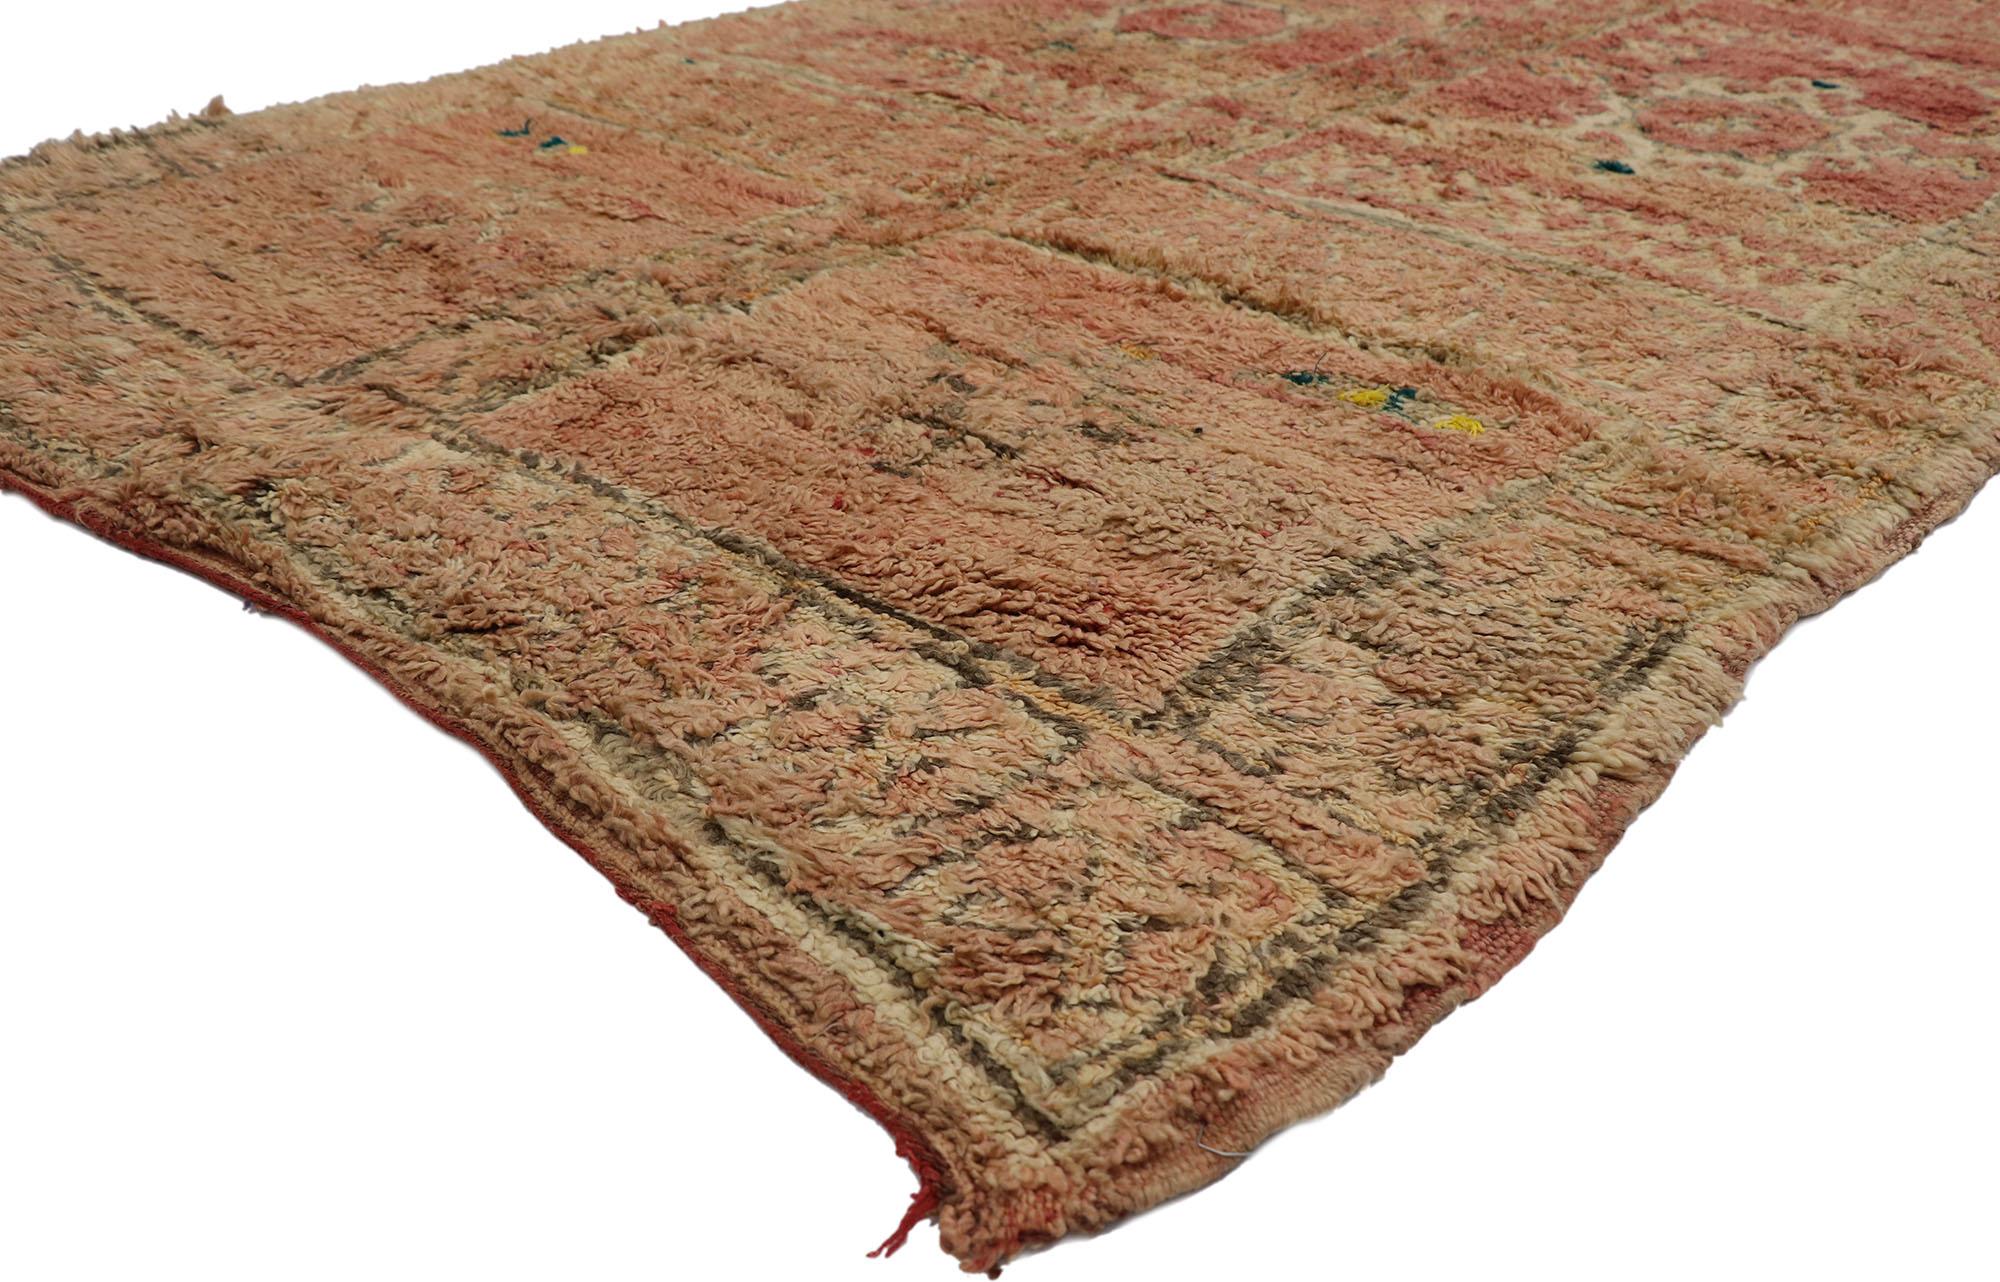 21511 Vintage Berber Boujad Moroccan rug 06'04 x 09'06. Warm and inviting with rustic sensibility, this hand-knotted wool vintage Berber Boujad Moroccan rug is a captivating vision of woven beauty. The abrash reddish-rust color field features an